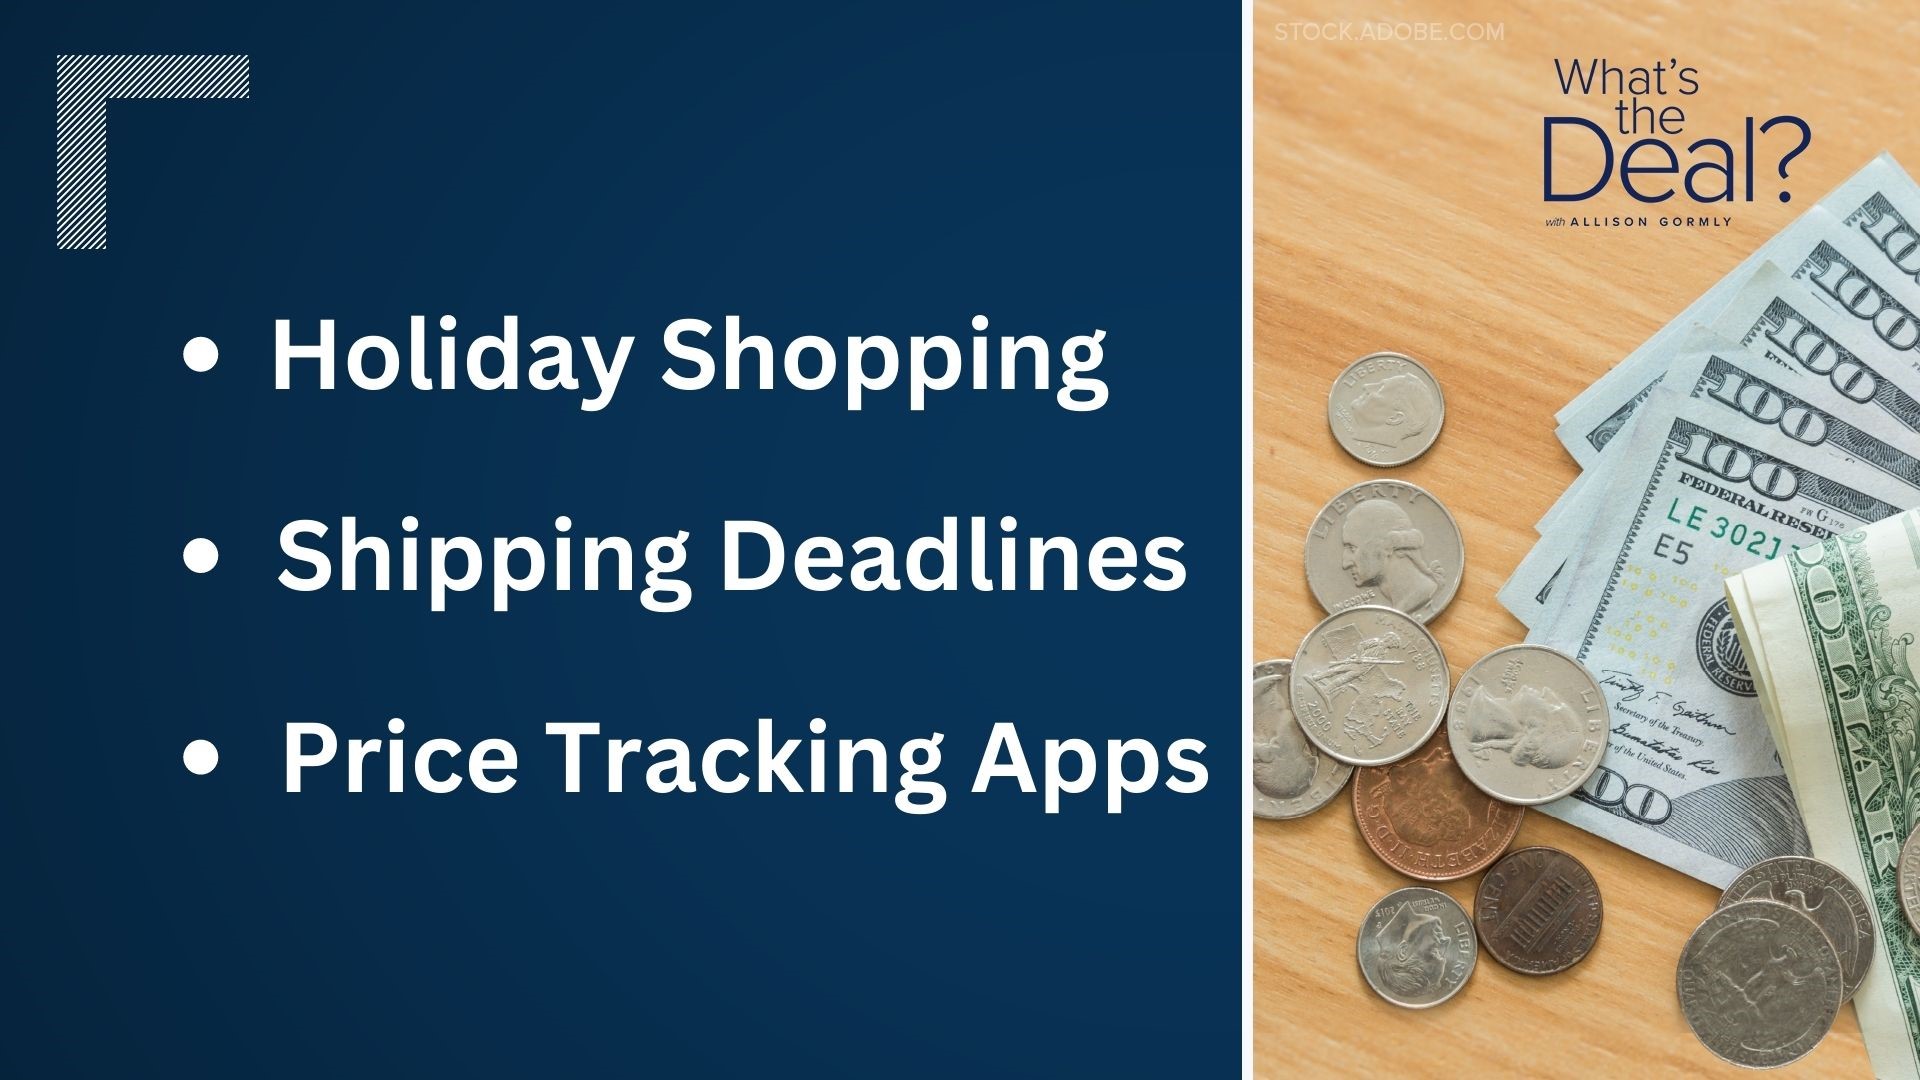 A look at what's the deal with holiday shopping and consumer spending amid inflation, plus shipping deadlines to keep in mind and price tracking apps to help save.